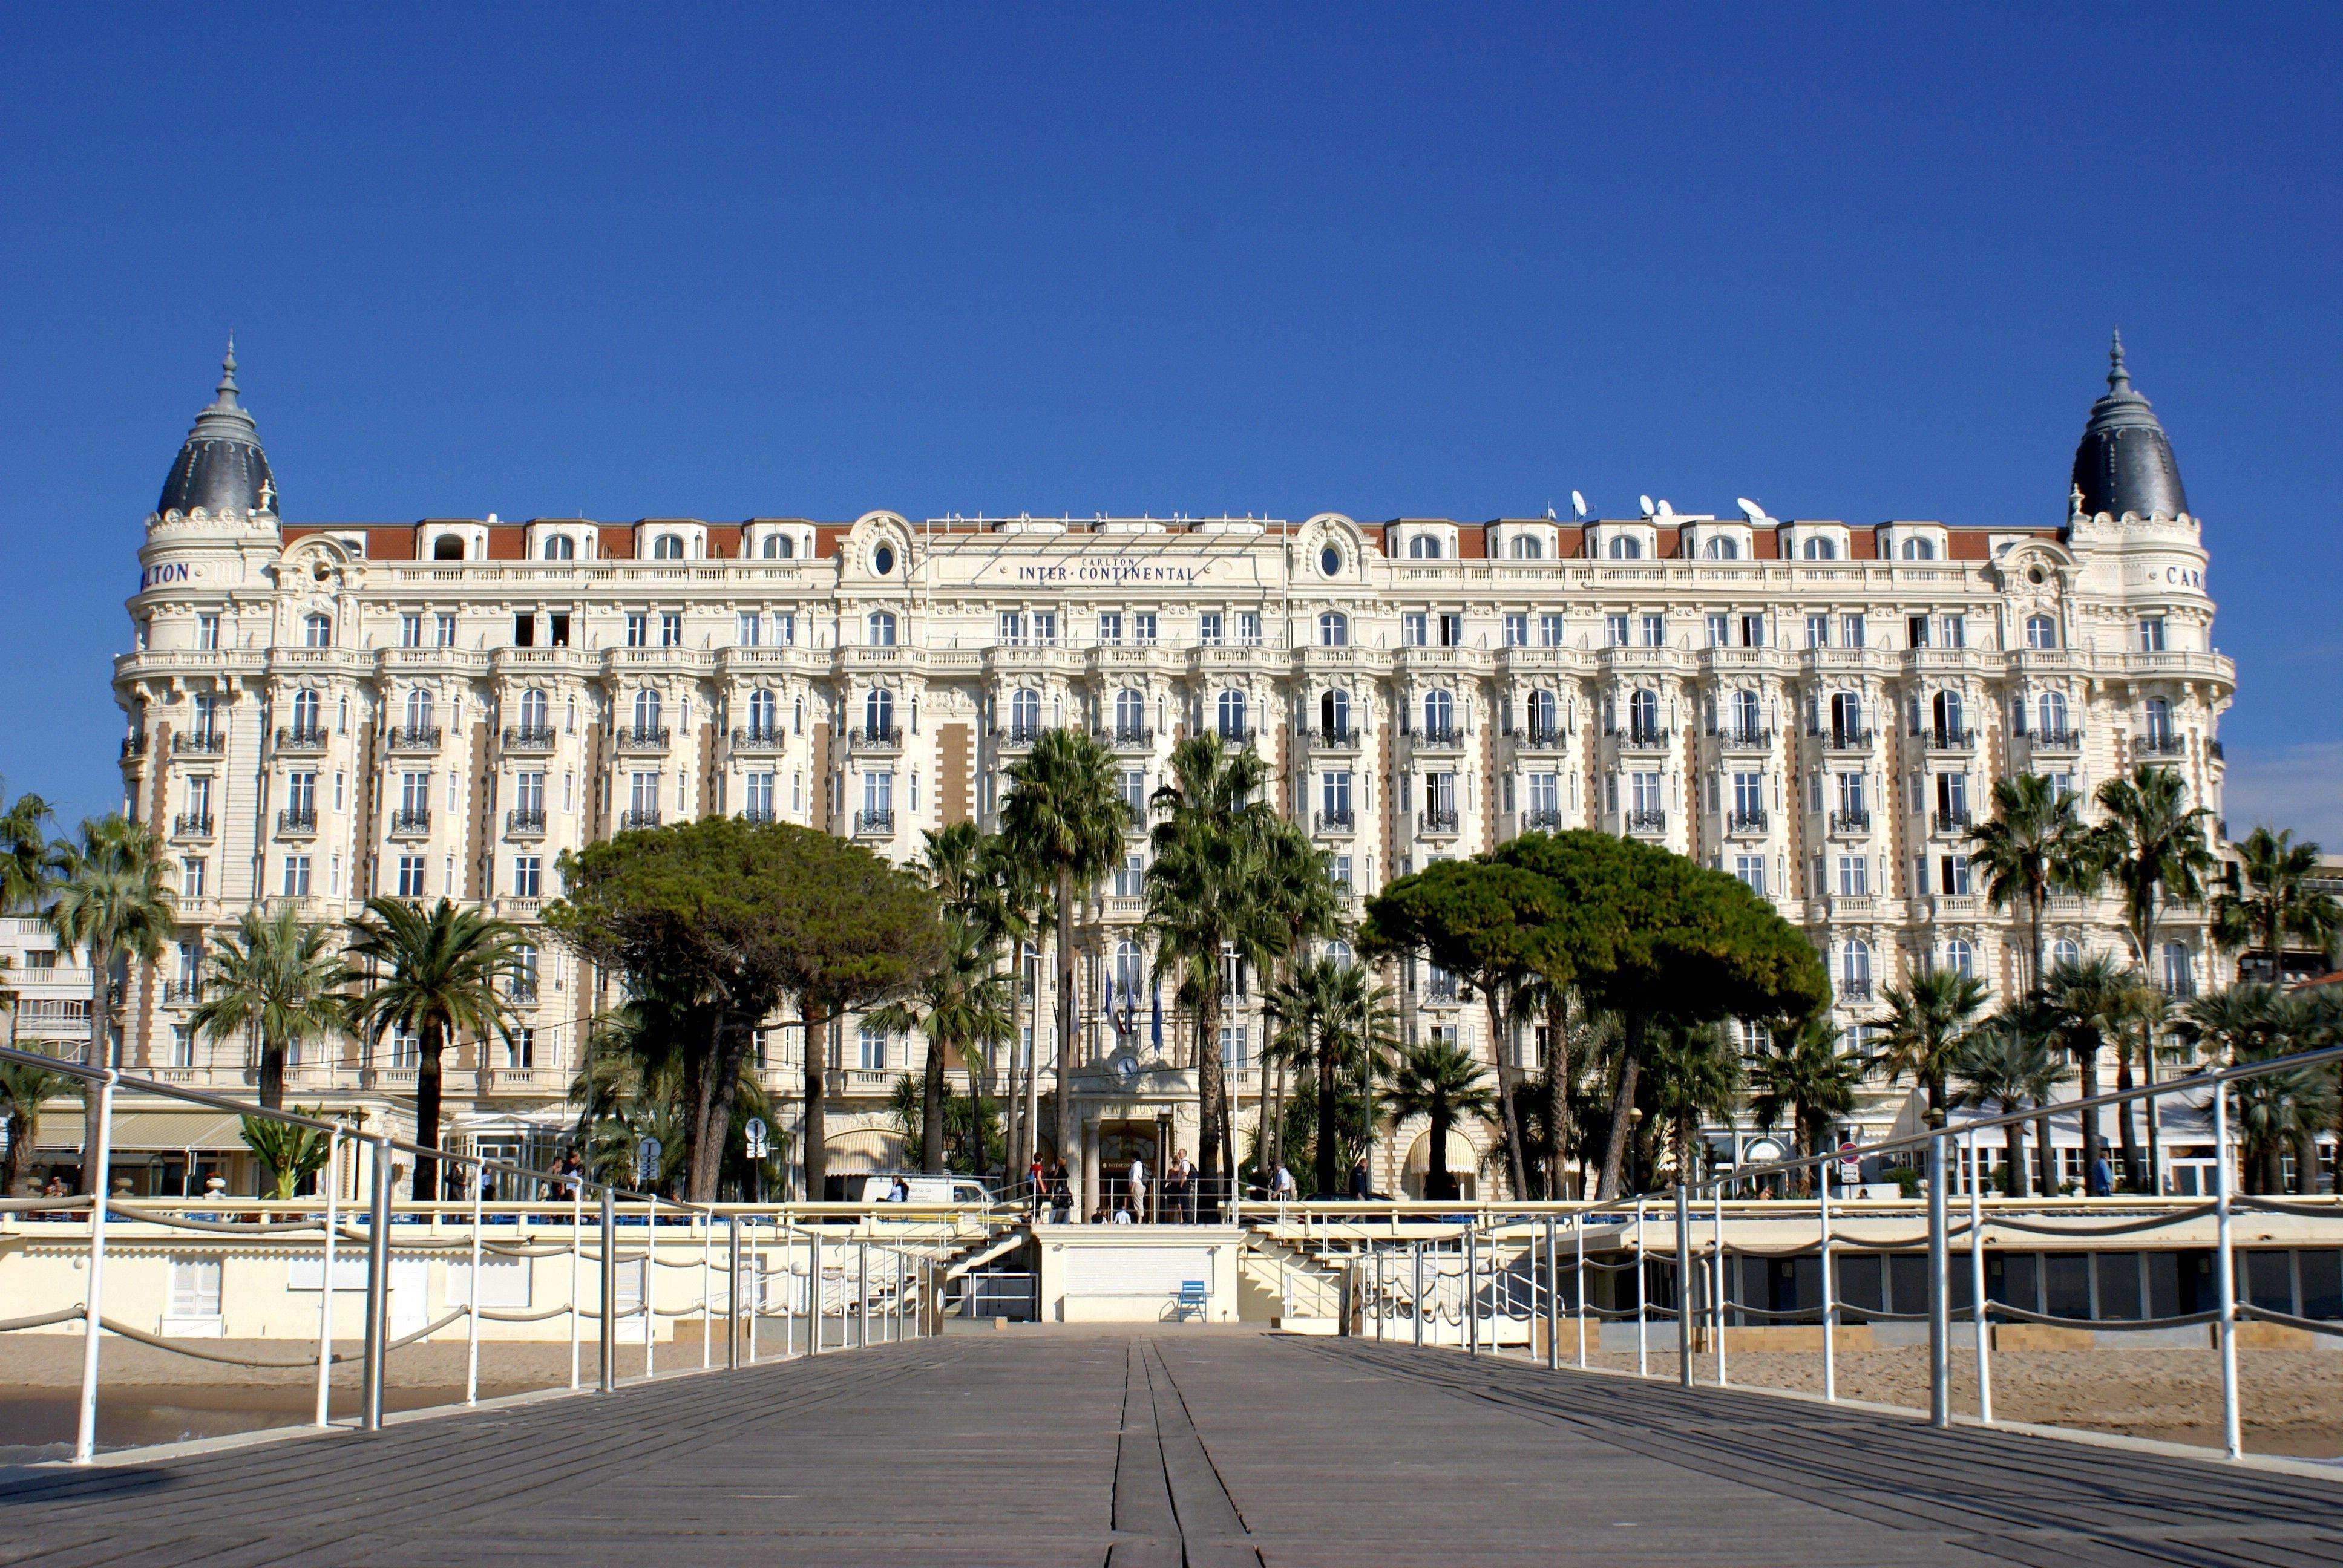 Hotels on the beach in Cannes, France wallpaper and image